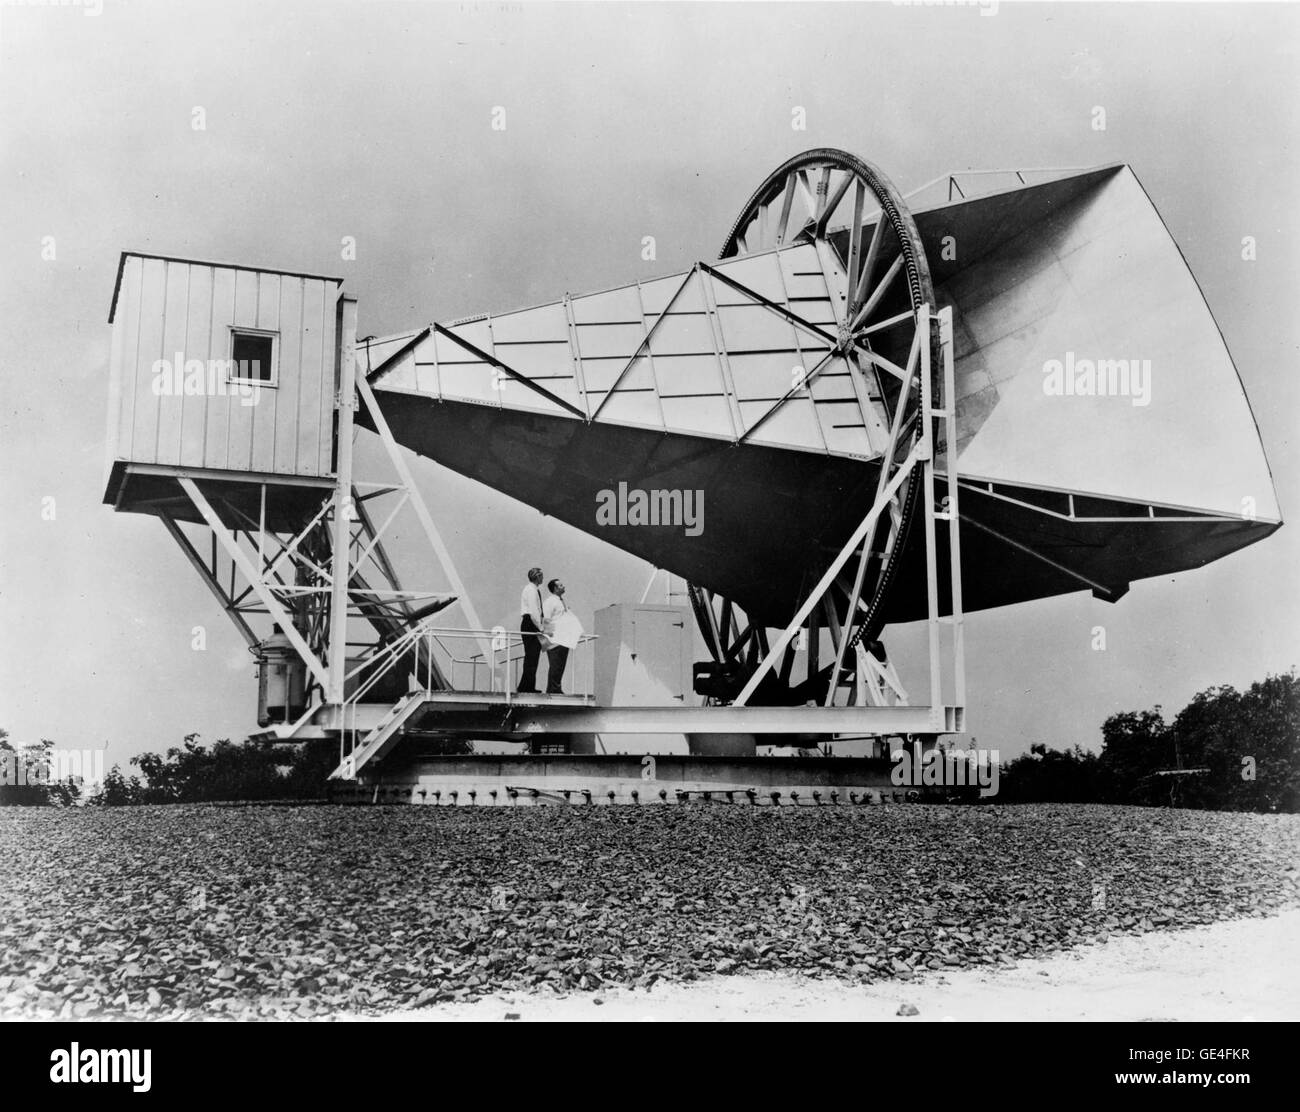 (June 1961) The Horn reflector antenna at Bell Telephone Laboratories in Holmdel, New Jersey was built in 1959 for pioneering work in communication satellites for the NASA ECHO I. The antenna was 50 feet in length and the entire structure weighed about 18 tons. It was comprised of aluminum with a steel base. It was used to detect radio waves that bounced off Project ECHO balloon satellites. The horn was later modified to work with the Telstar Communication Satellite frequencies as a receiver for broadcast signals from the satellite. In 1990 the horn was dedicated to the National Park Service a Stock Photo